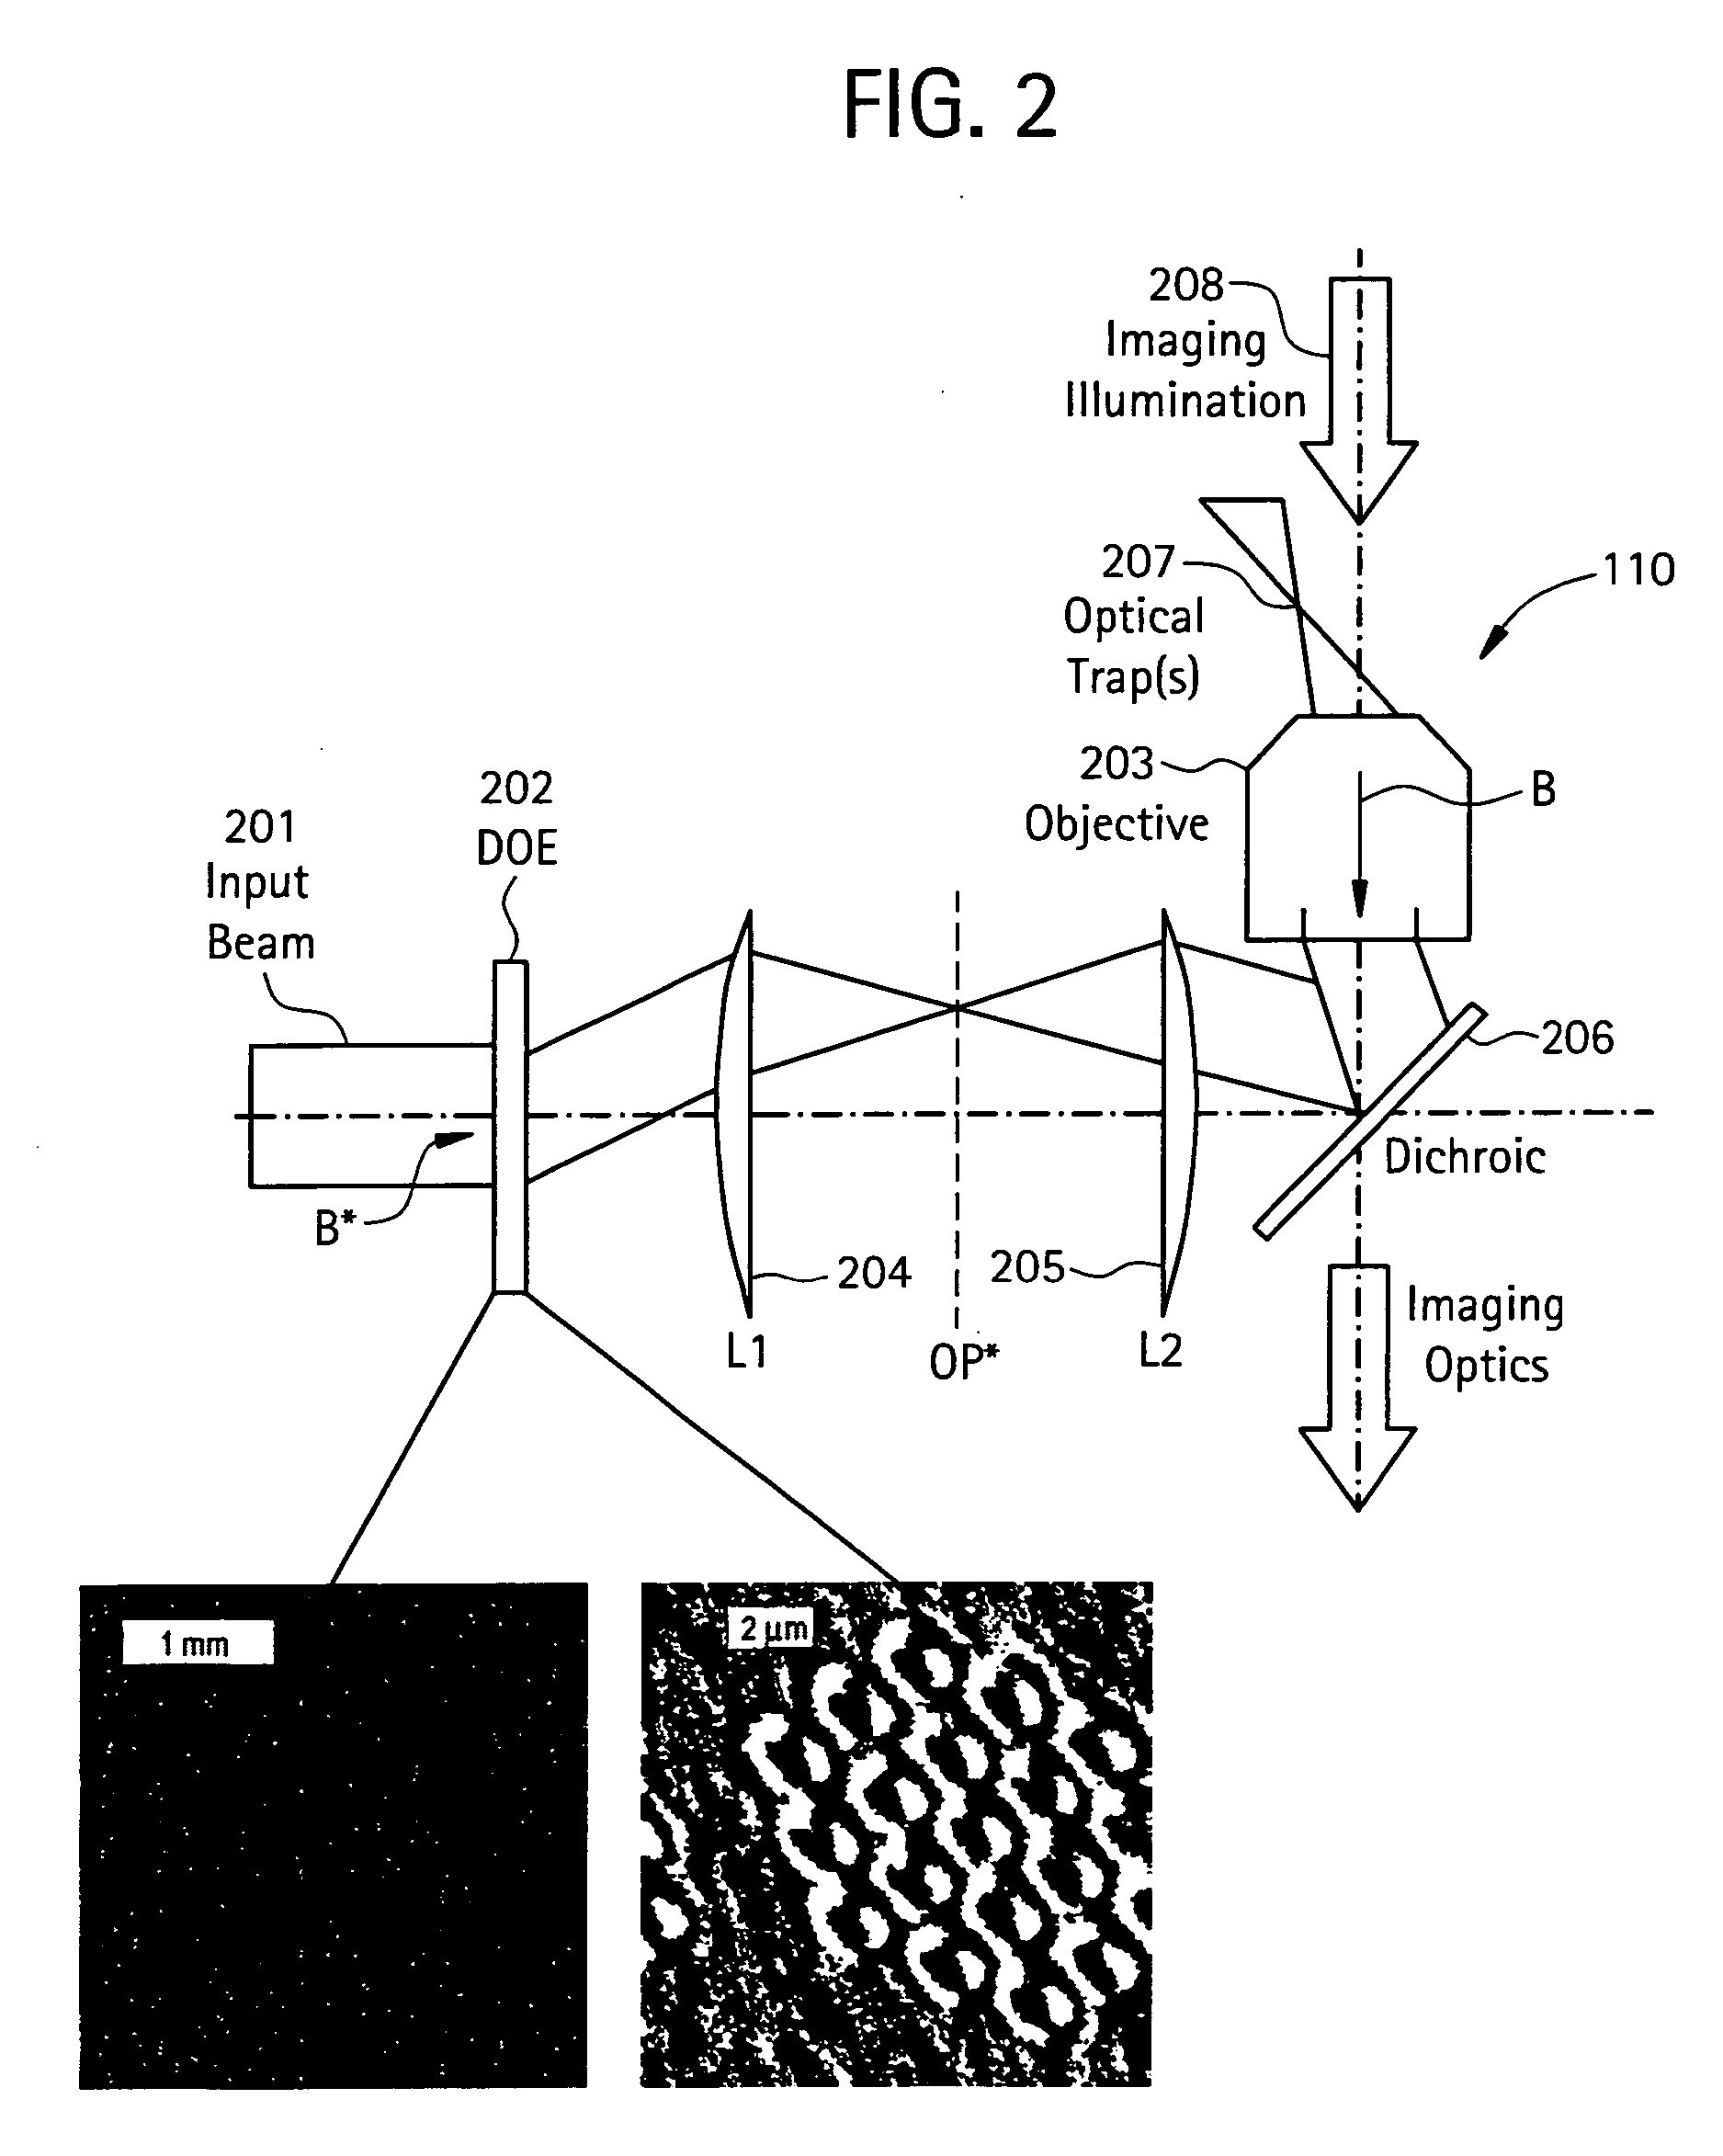 Apparatus and method for detecting deformability of cells using spatially modulated optical force microscopy